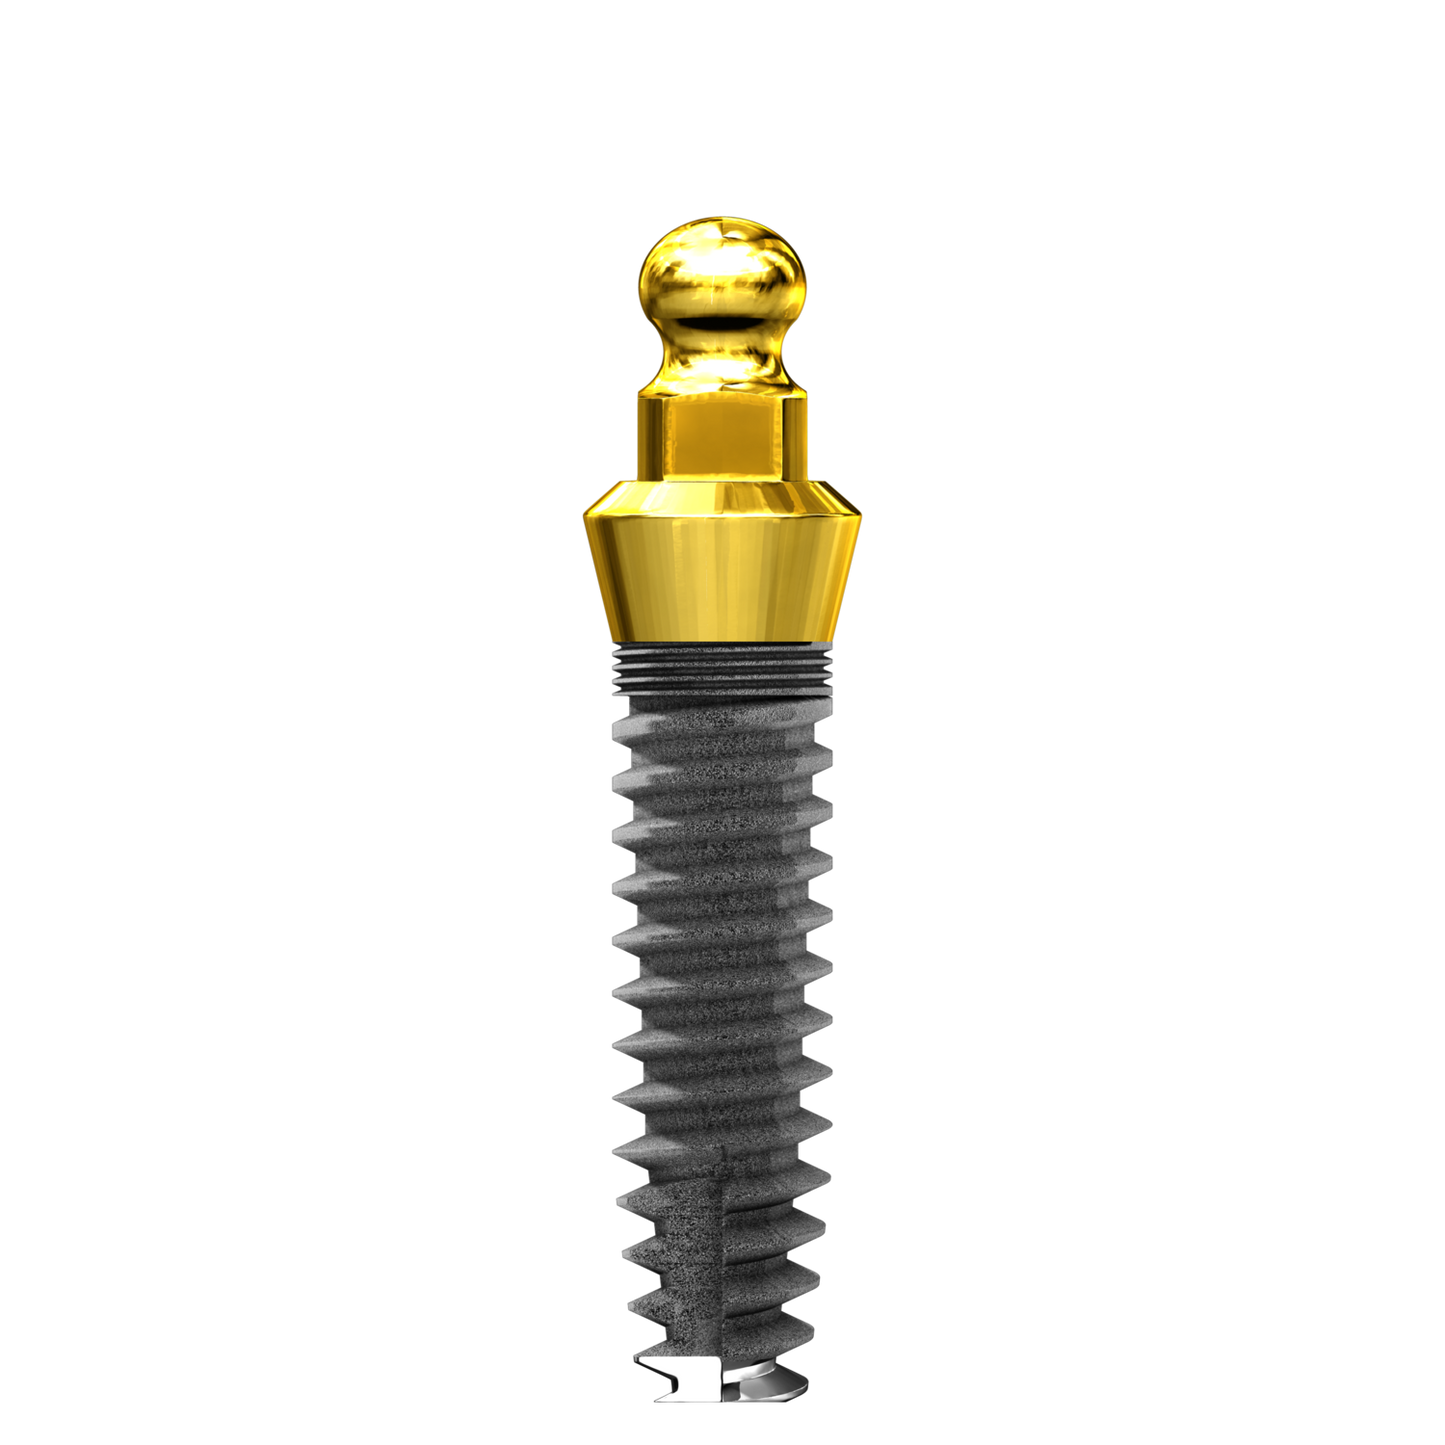 3.25mm x 8mm ISI O-Ball One Piece Implant